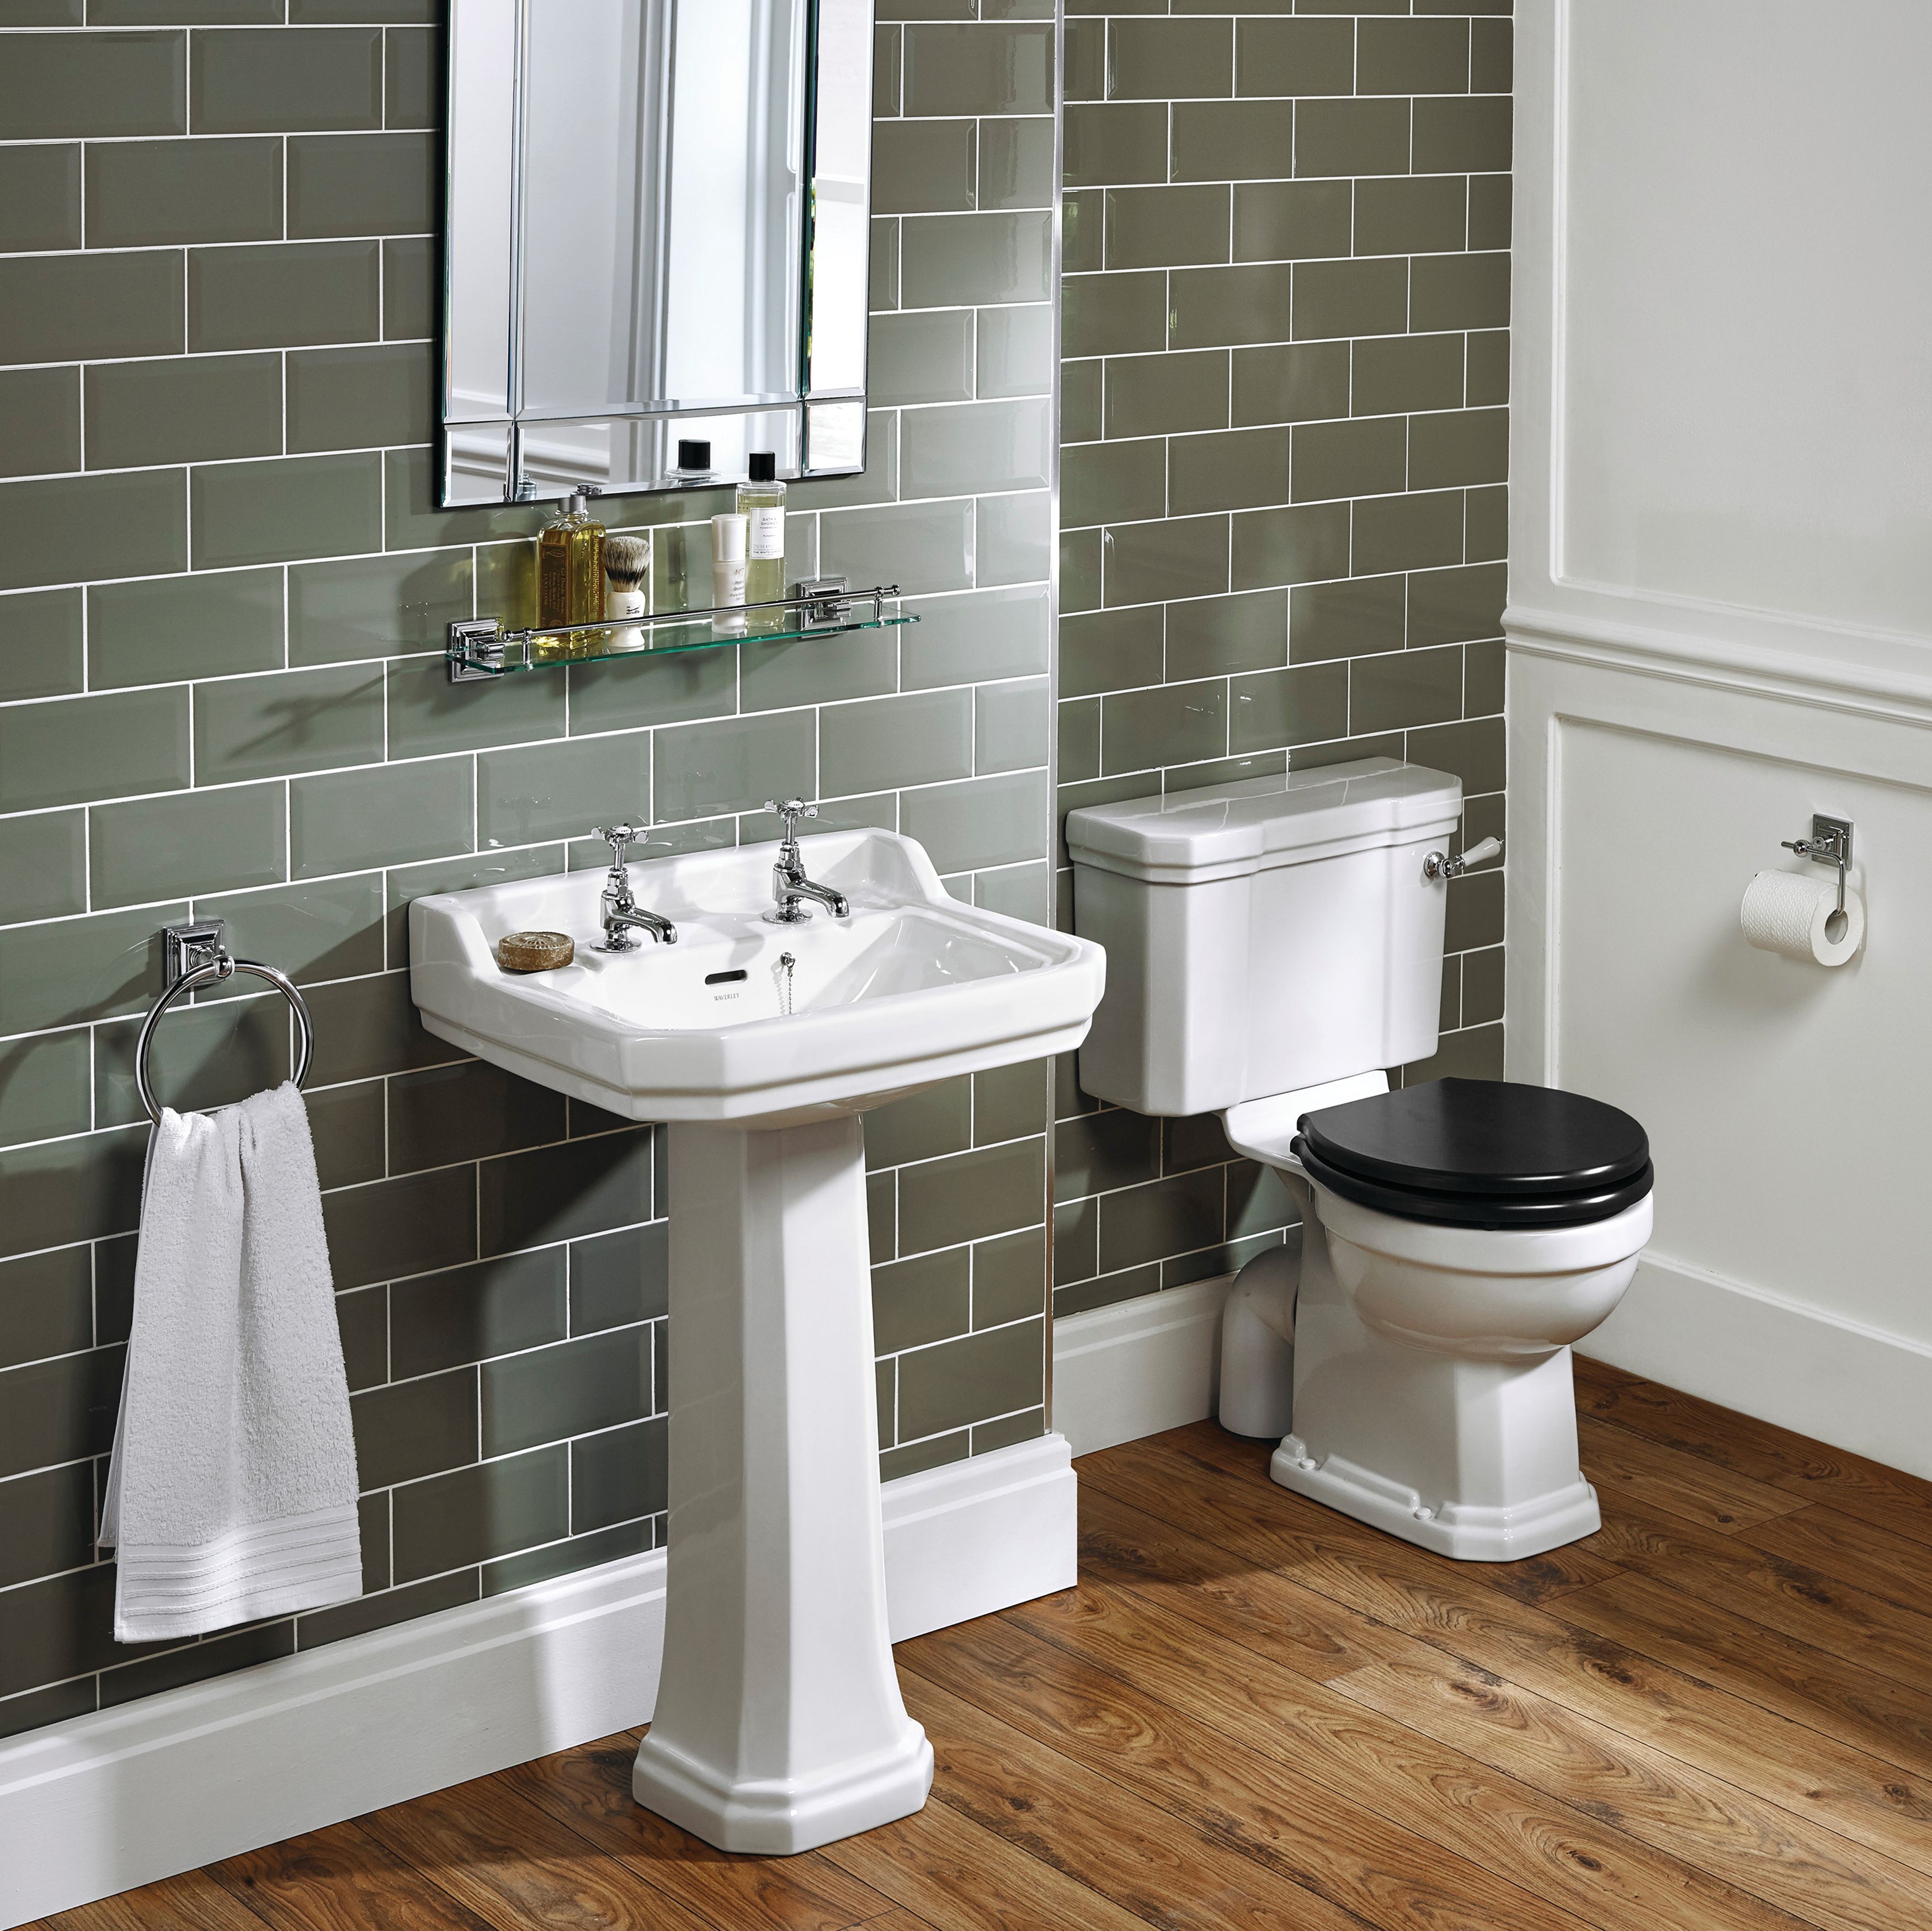 Ideal Standard Waverley White Close-coupled Toilet set with Standard close seat